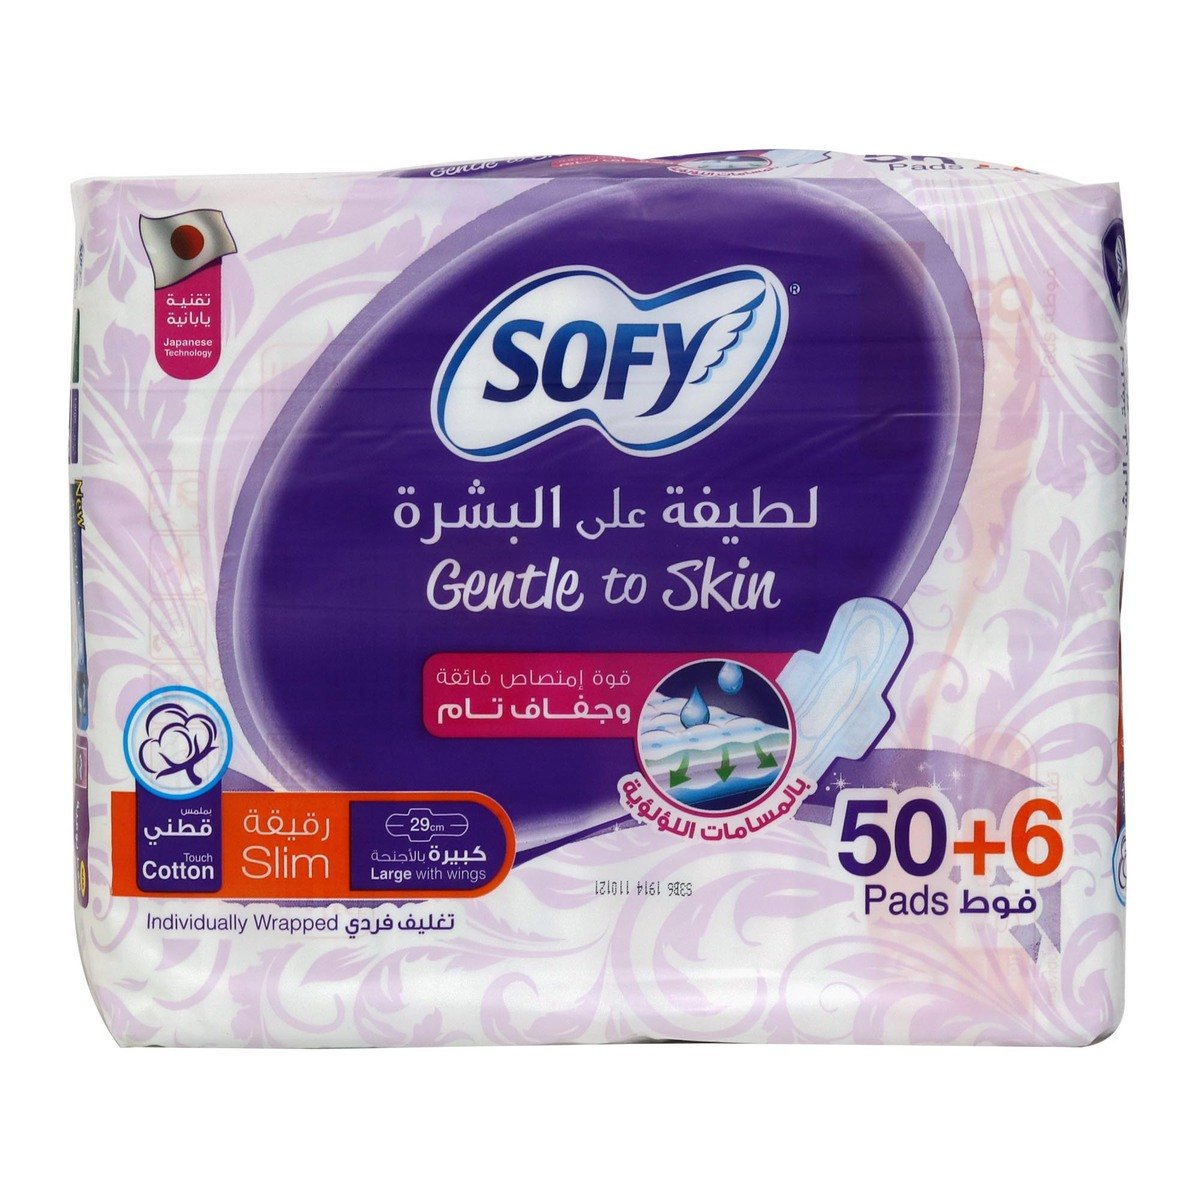 Sofy Slim Pads Large With Wings Gentle To Skin Size 29cm 50+6